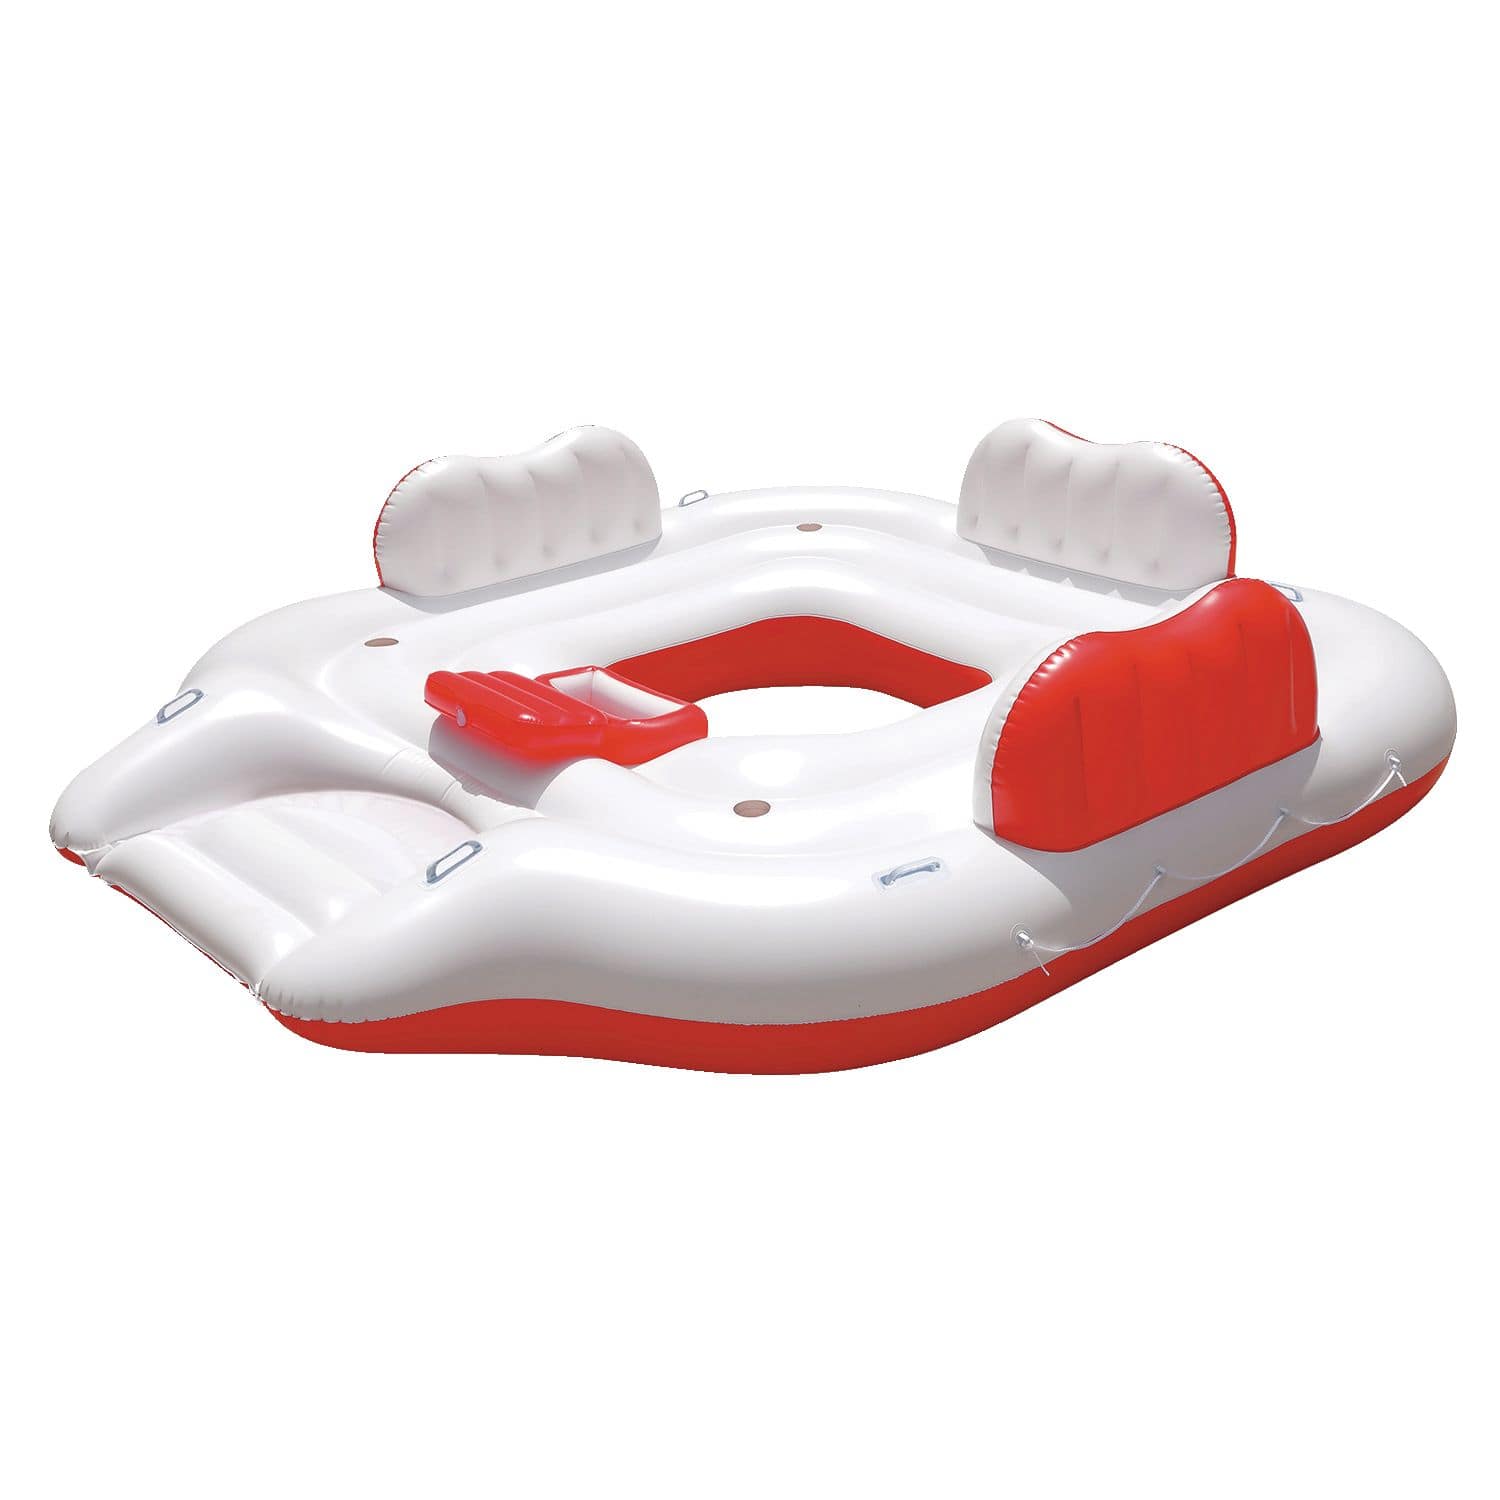 Summer Waves Inflatable Floating River/Lake 4-Person Party Island w/Cooler,  White/Red